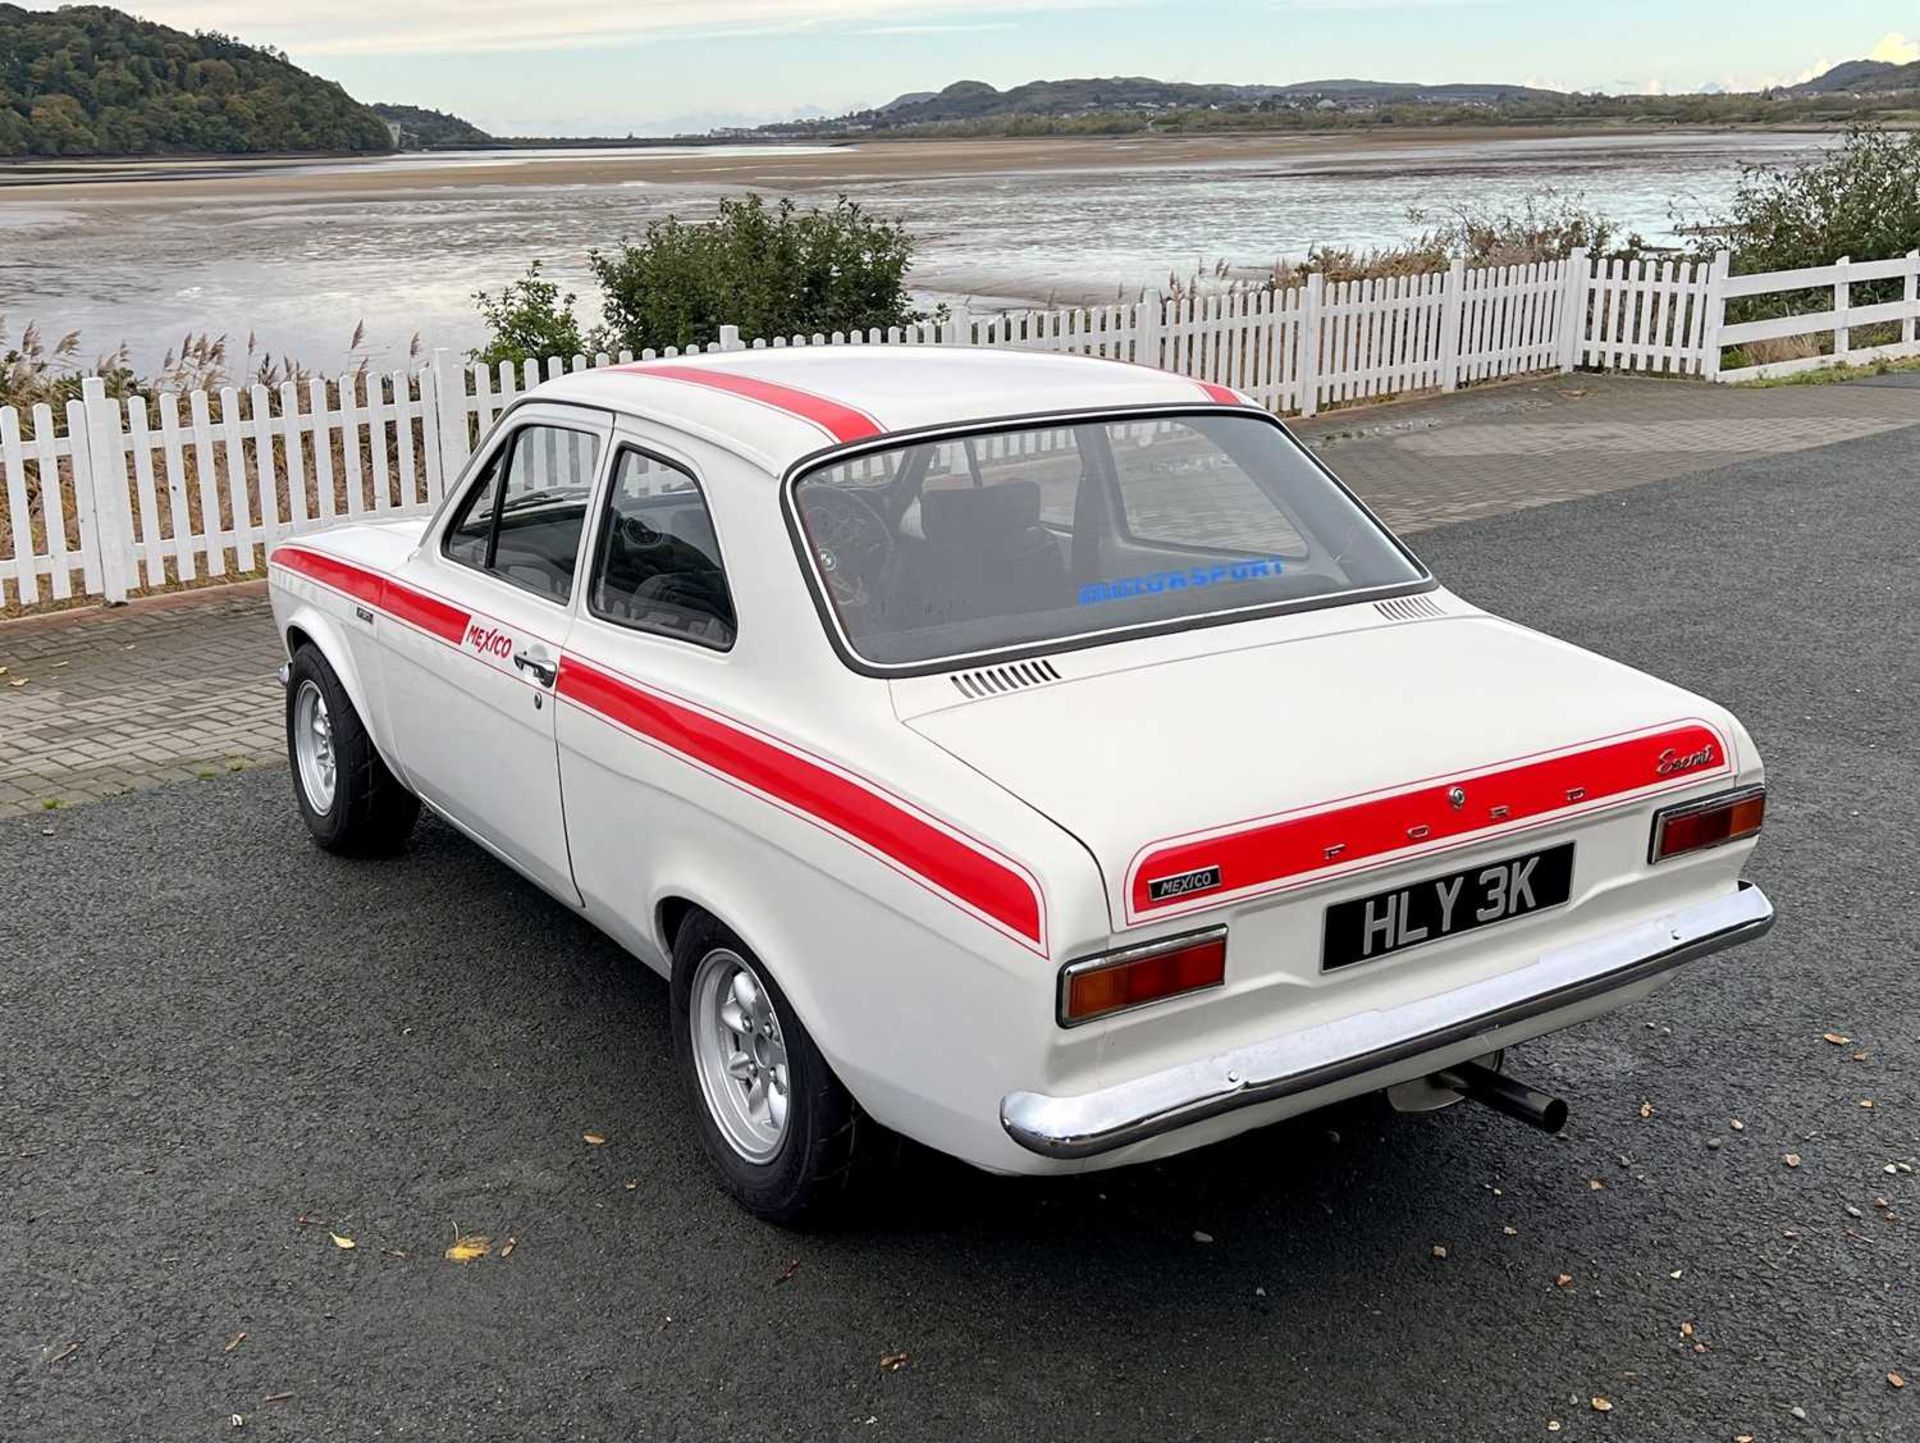 1971 Ford Escort Mexico with 2.1-litre Cosworth engine 2.1-Litre naturally aspirated Cosworth engine - Image 18 of 55